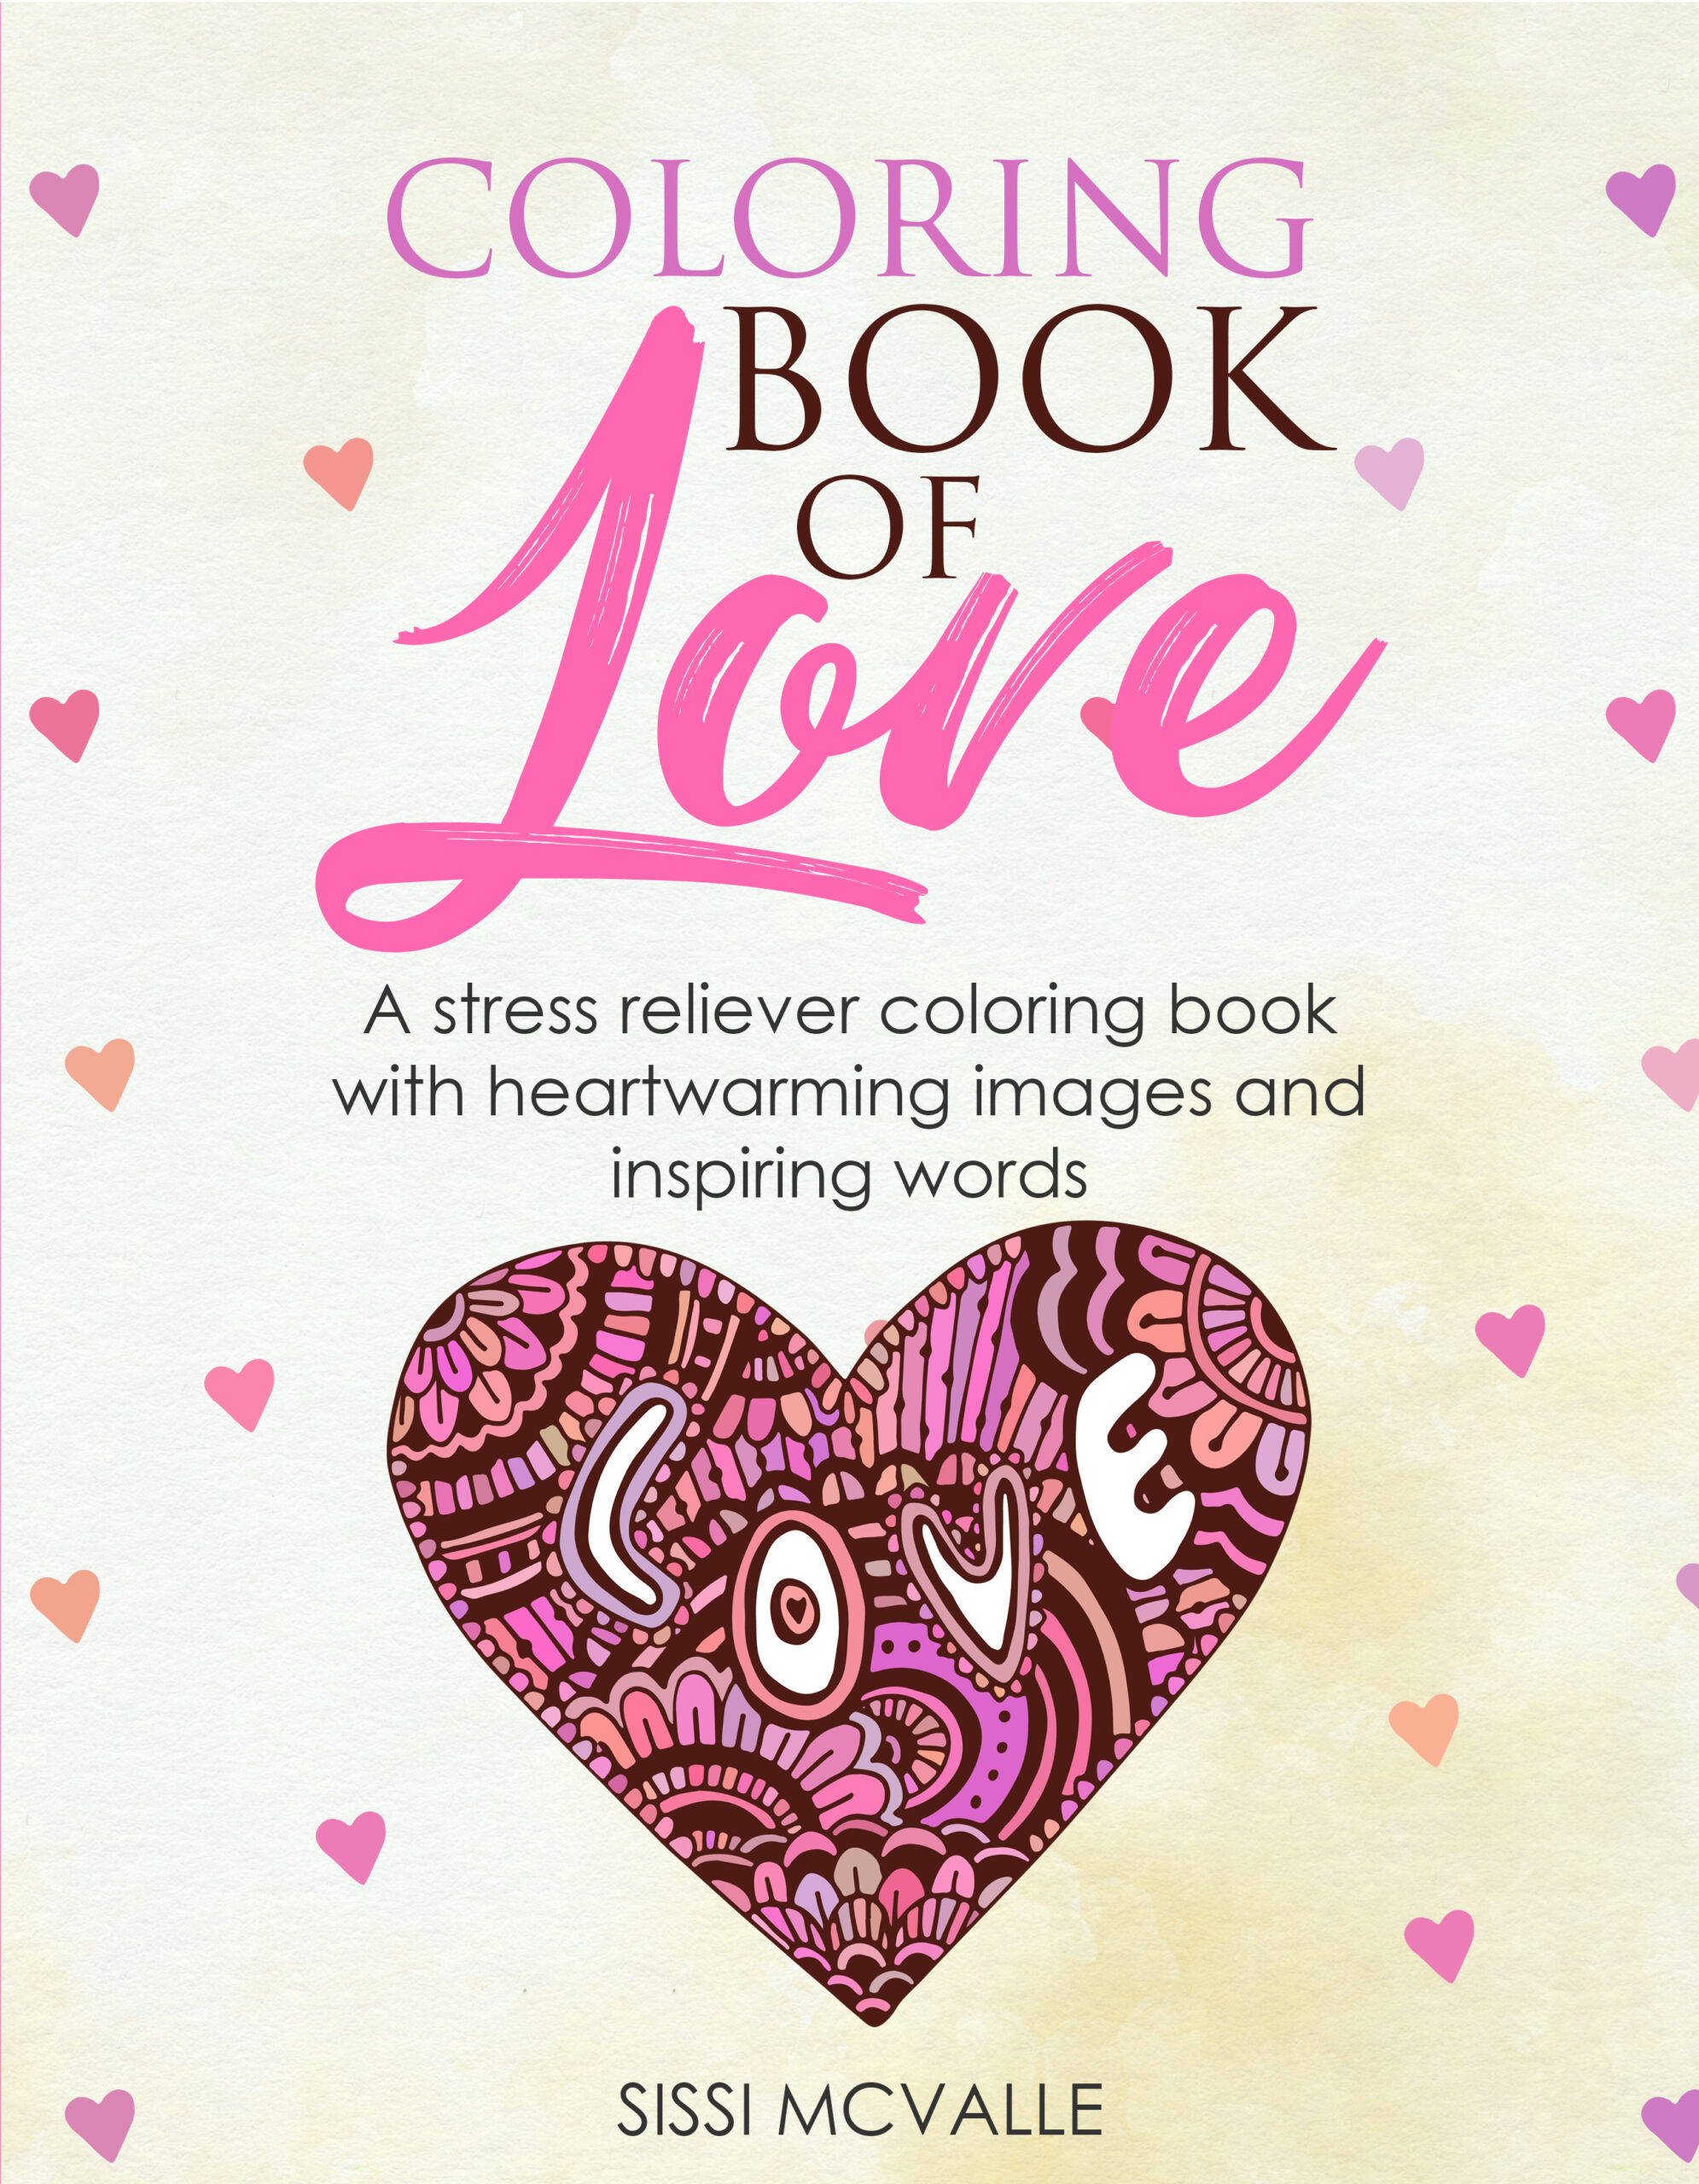 FREE: Coloring book of love: by A stress reliever coloring book with heartwarming images and inspiring words